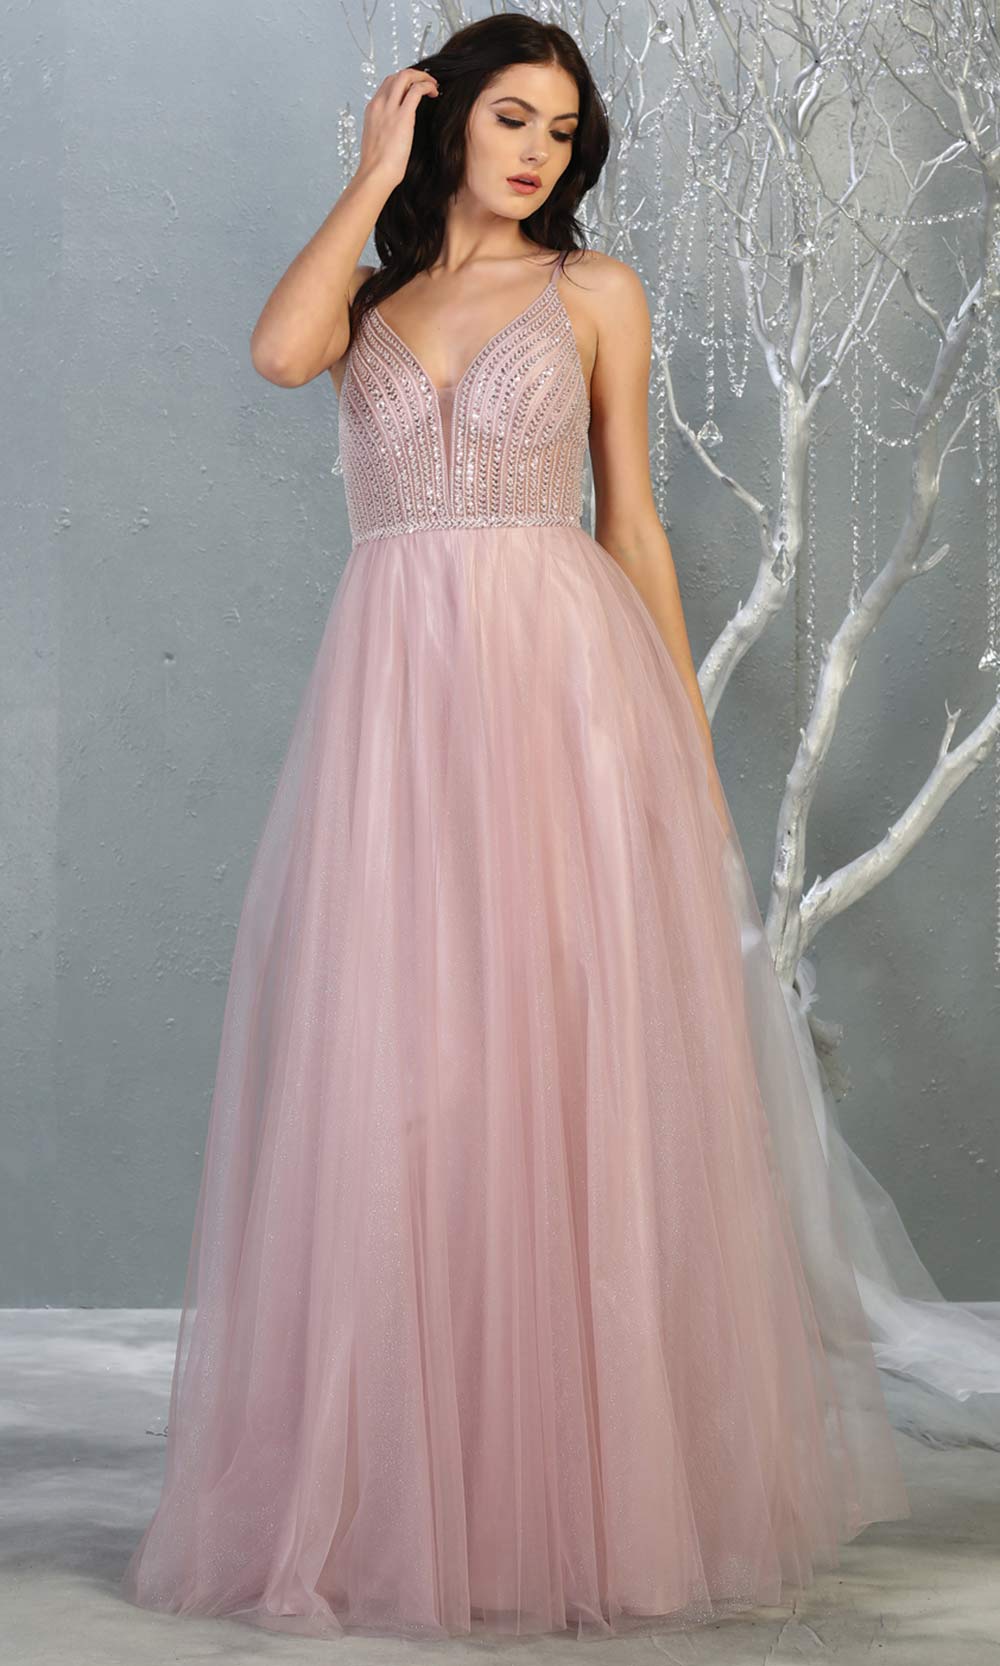 Mayqueen MQ1812 long mauve pink v neck evening flowy tulle dress.Full length dusty rose beaded top w/wide straps is perfect for  enagagement/e-shoot dress, formal wedding guest, indowestern gown, evening party dress, prom, bridesmaid. Plus sizes avail.jpg